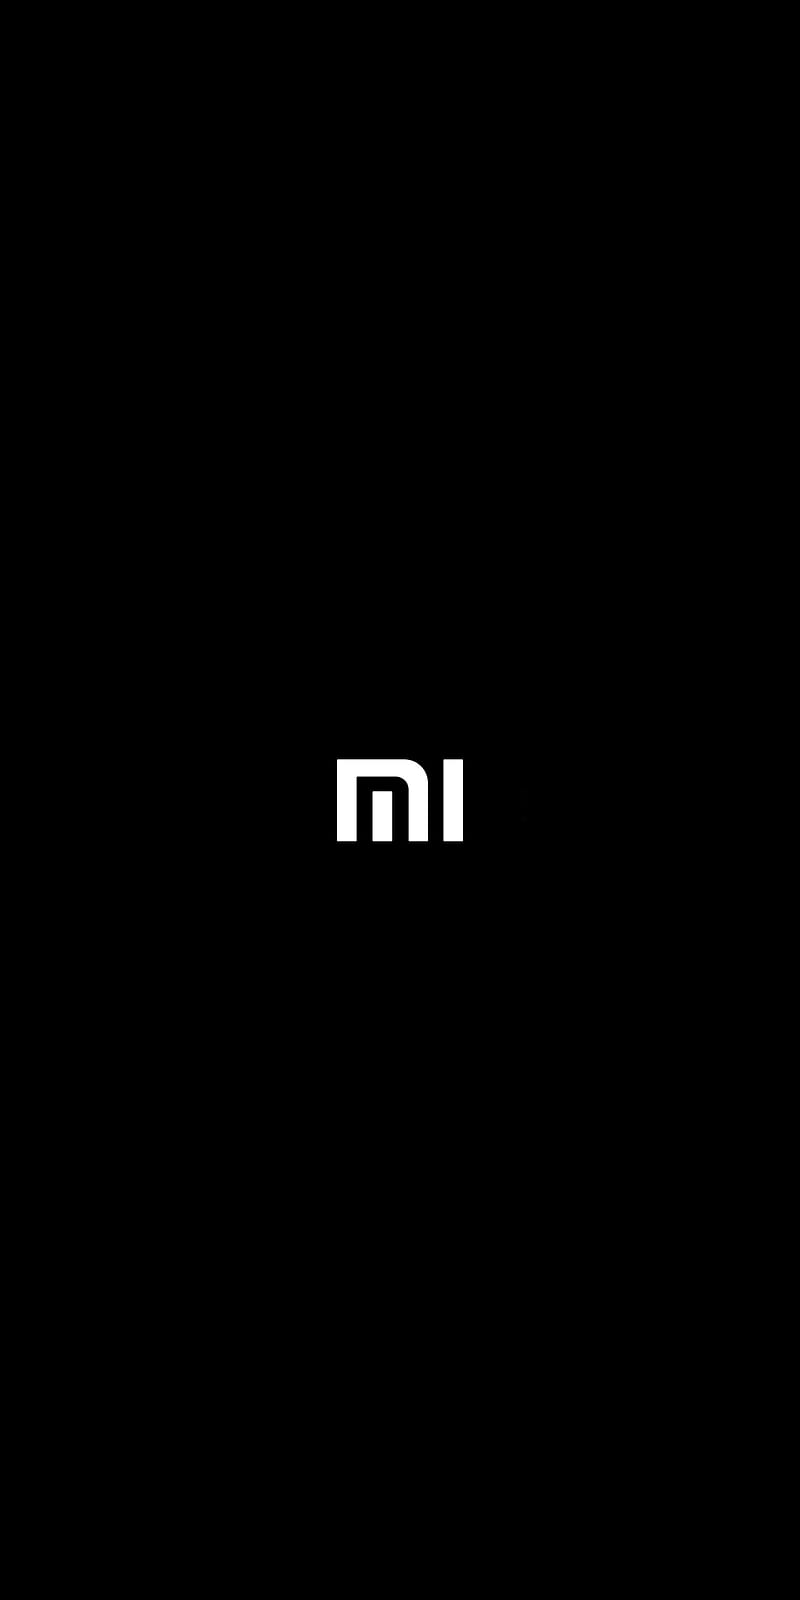 Download latest MIUI 12 wallpapers